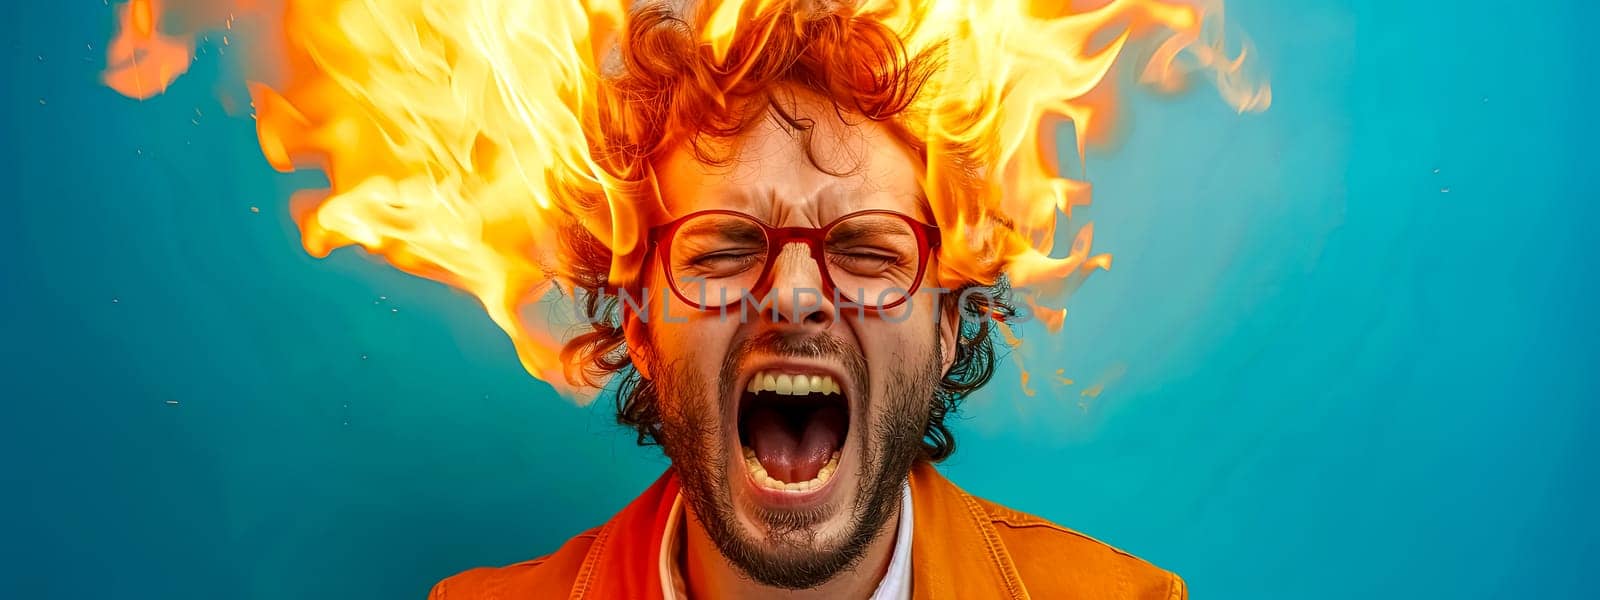 Intense portrait of a man with his hair ablaze, expressing extreme emotion against a vivid blue backdrop